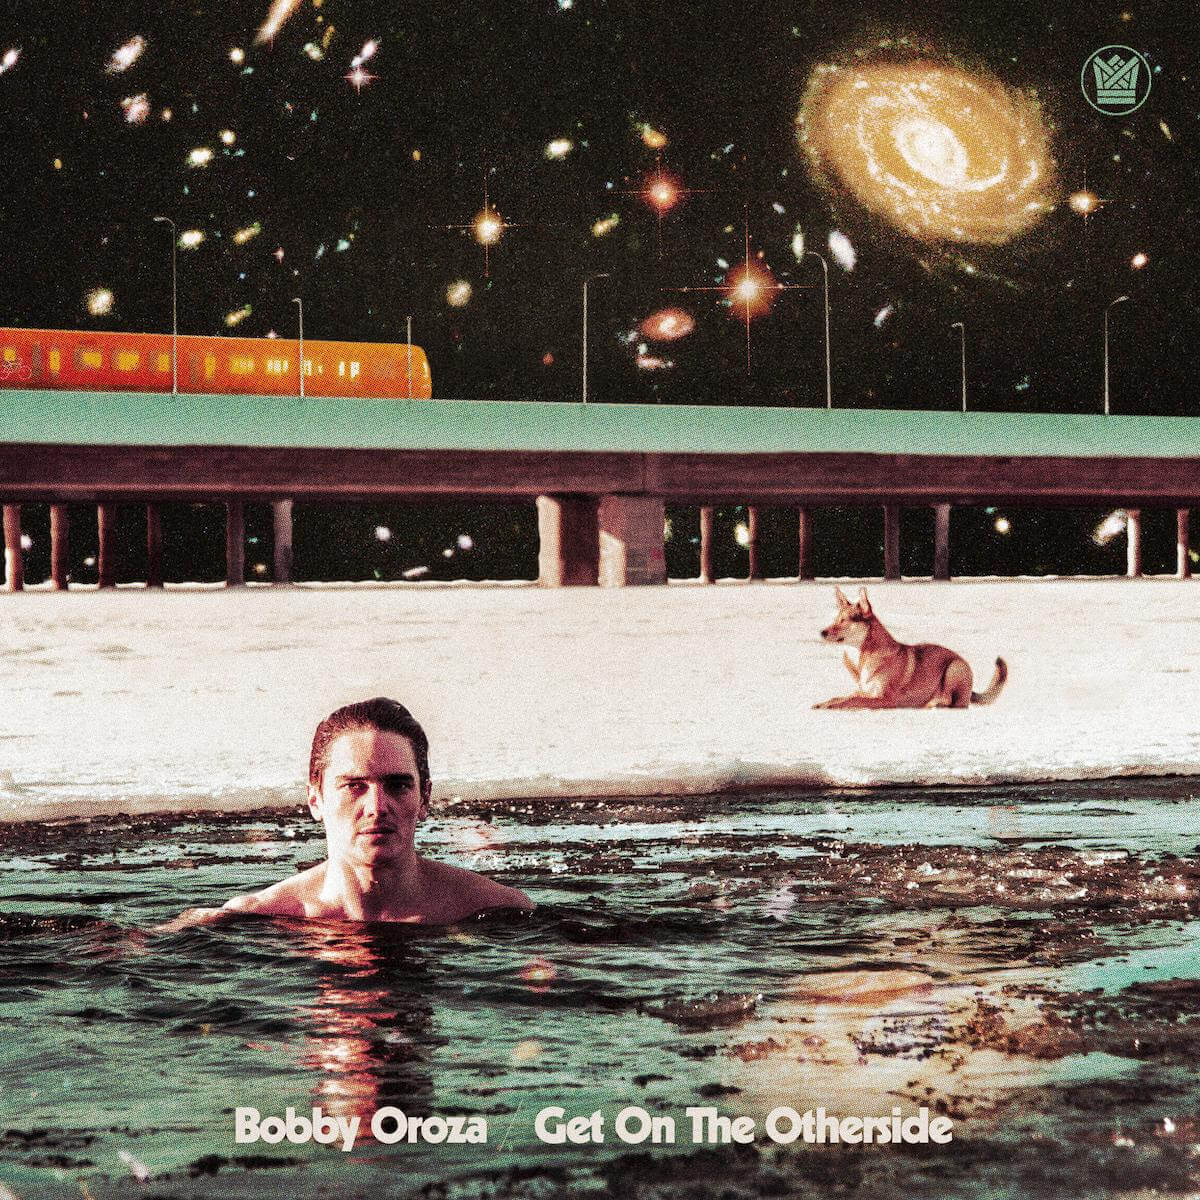 Get On The Otherside By Bobby Oroza is Northern Transmissions Song of the Day. The track is now available via Big Crown Records